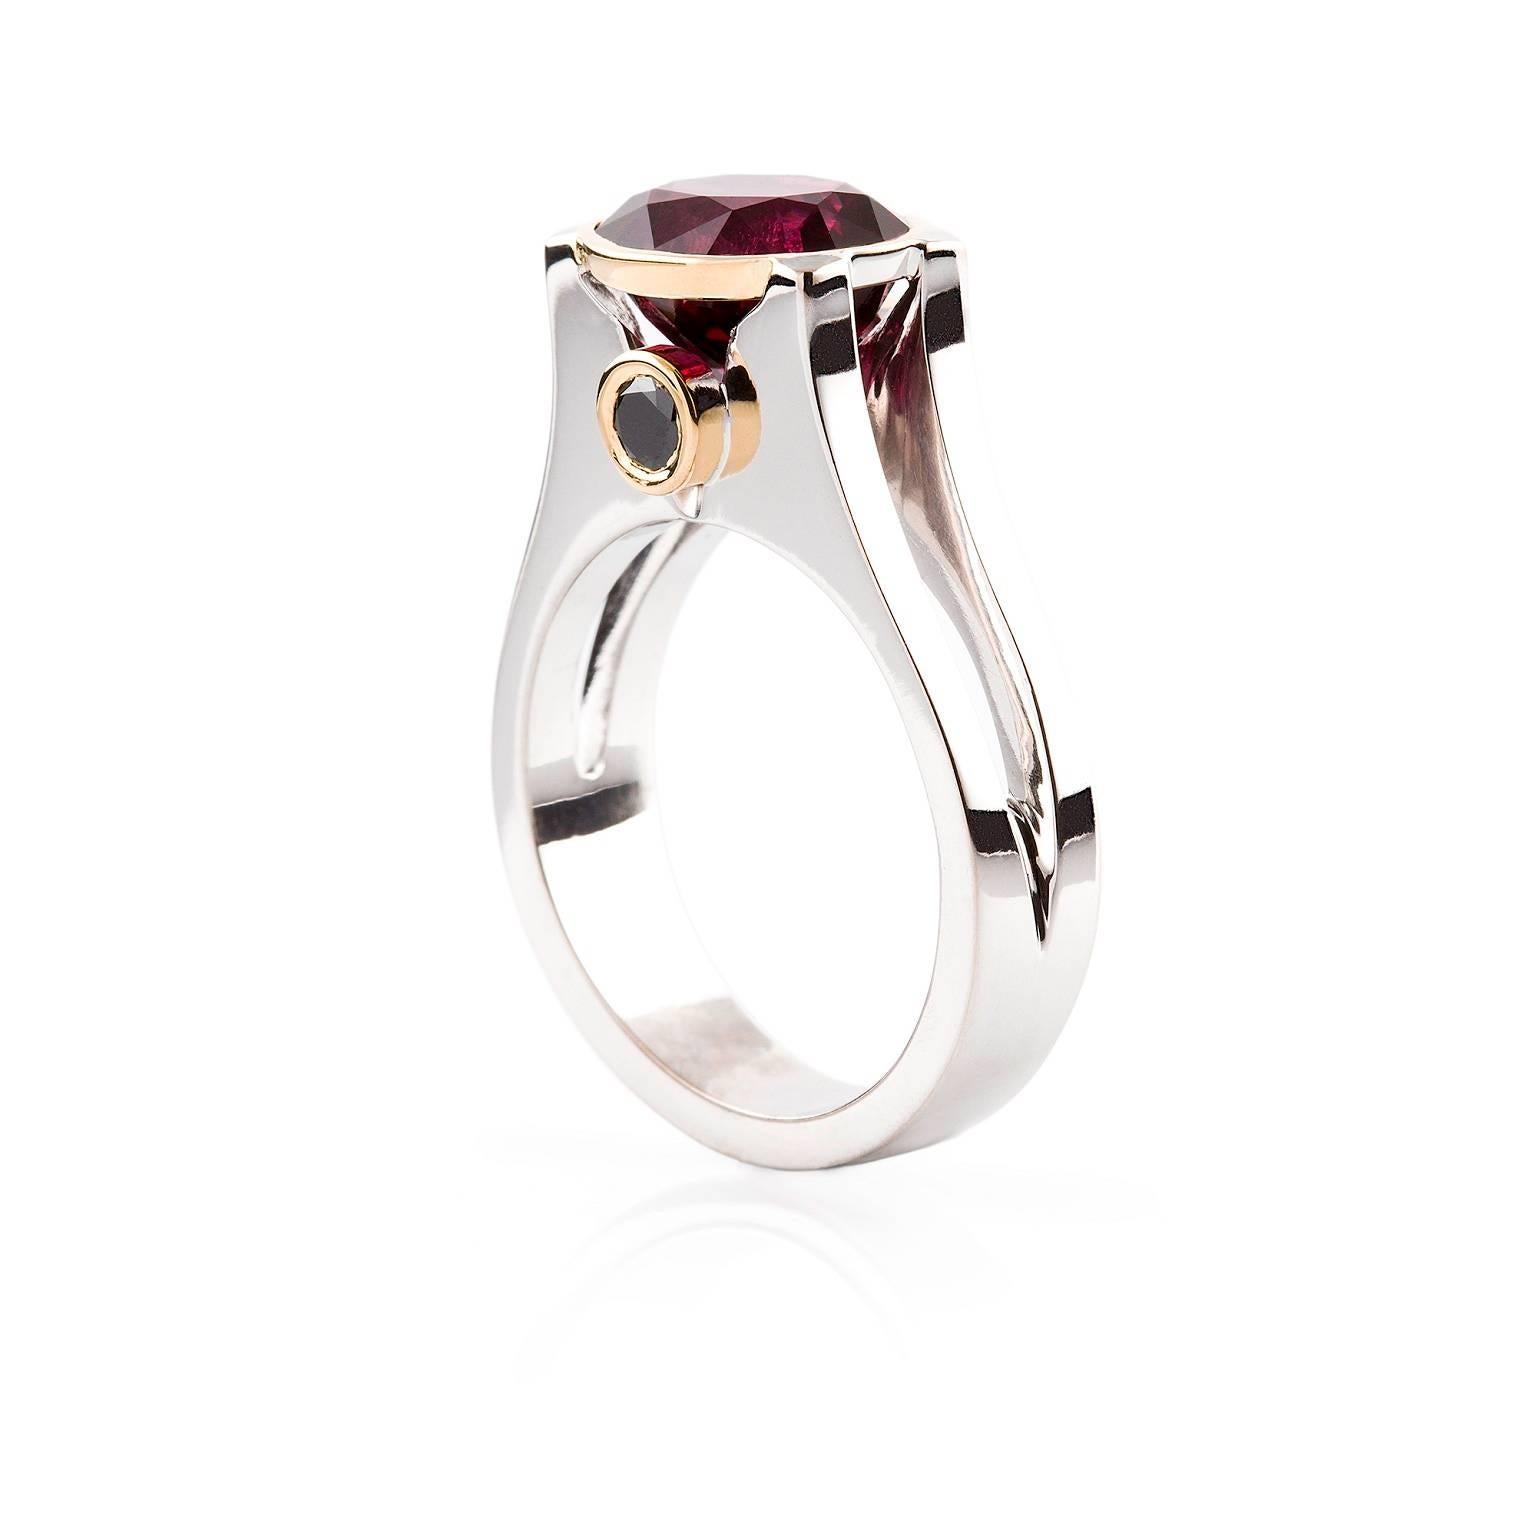 Rosa & Nero Ring

The exquisite  18 carat two tone gold ring features a stunning rhodolite garnet and black diamond pair. All chenier settings are made of 18ct yellow gold atop the split and upswept white gold band.

Oval faceted rhodolite garnet: